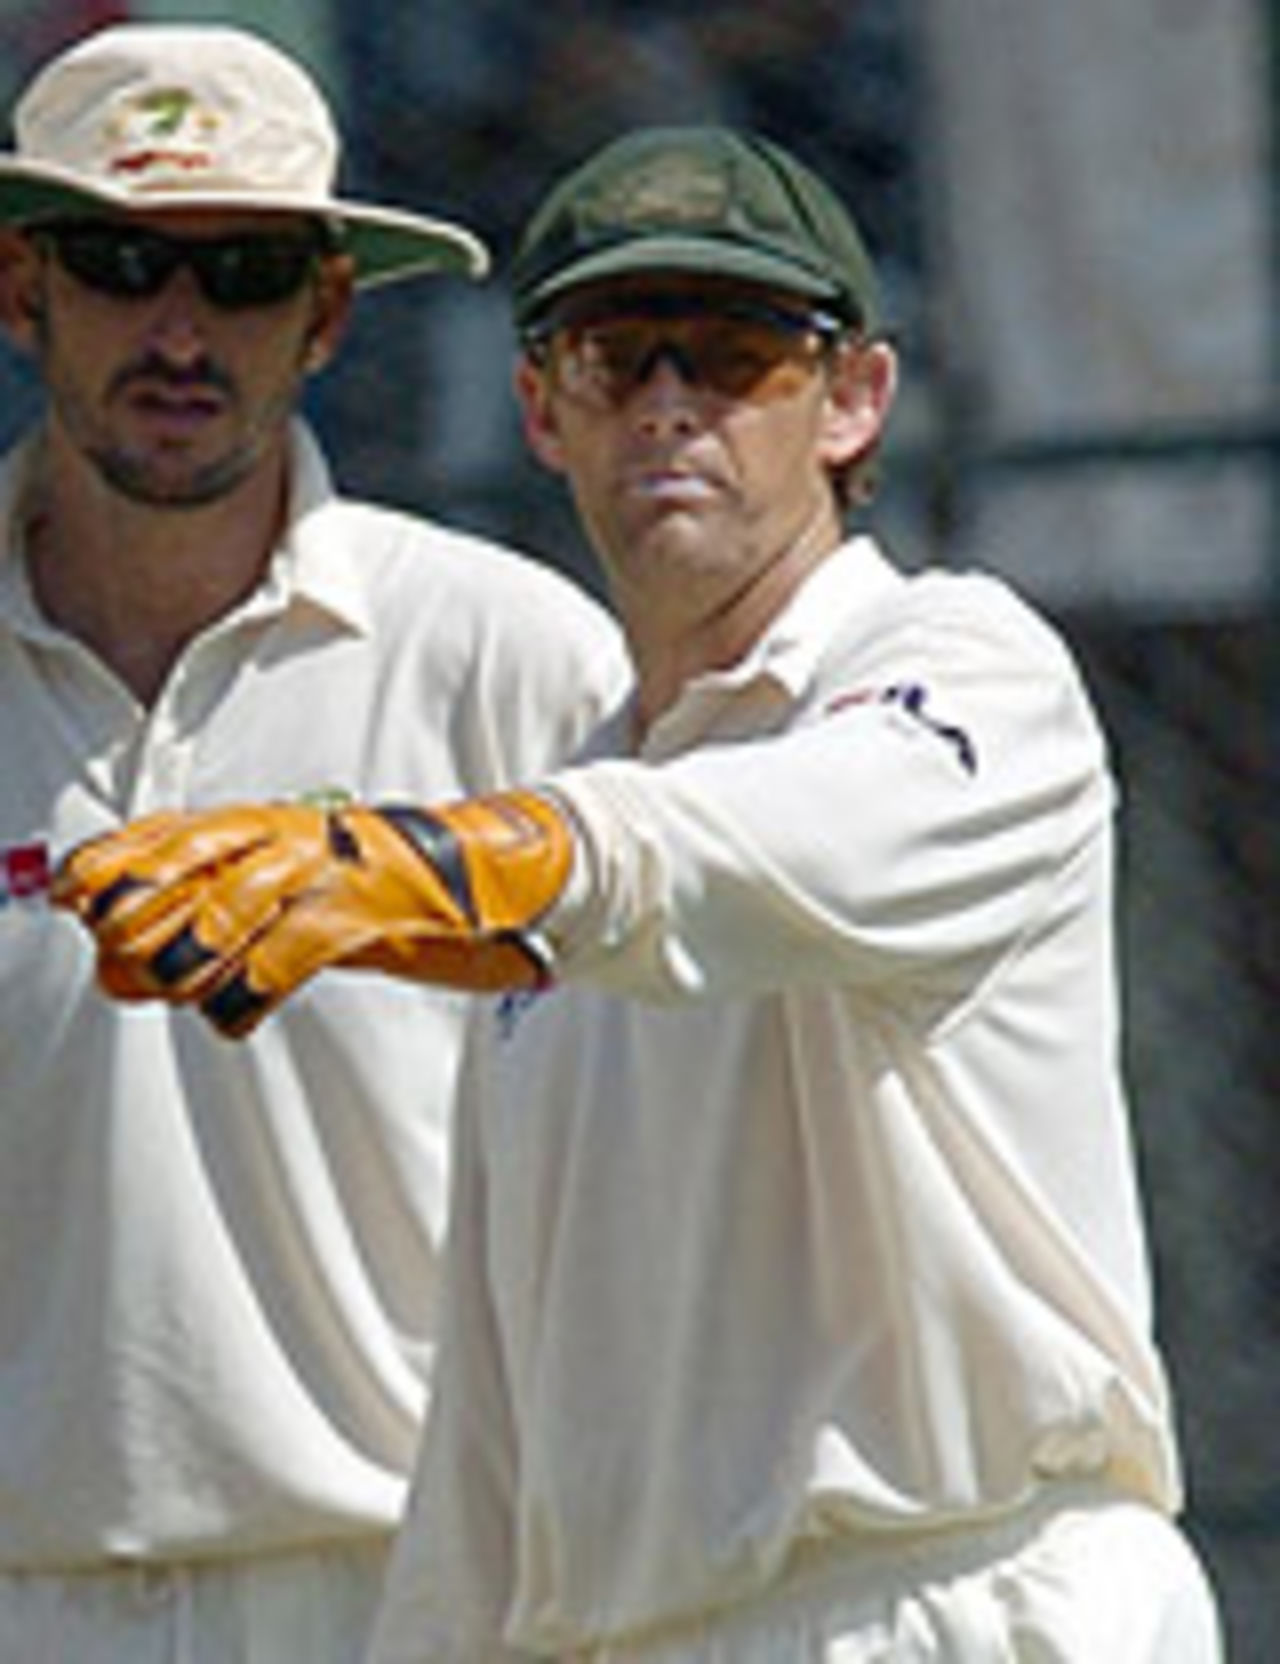 Adam Gilchrist marshalls his resources in Ricky Ponting's absence from the side, India v Australia, 1st Test, Bangalore, 3rd day, October 8, 2004